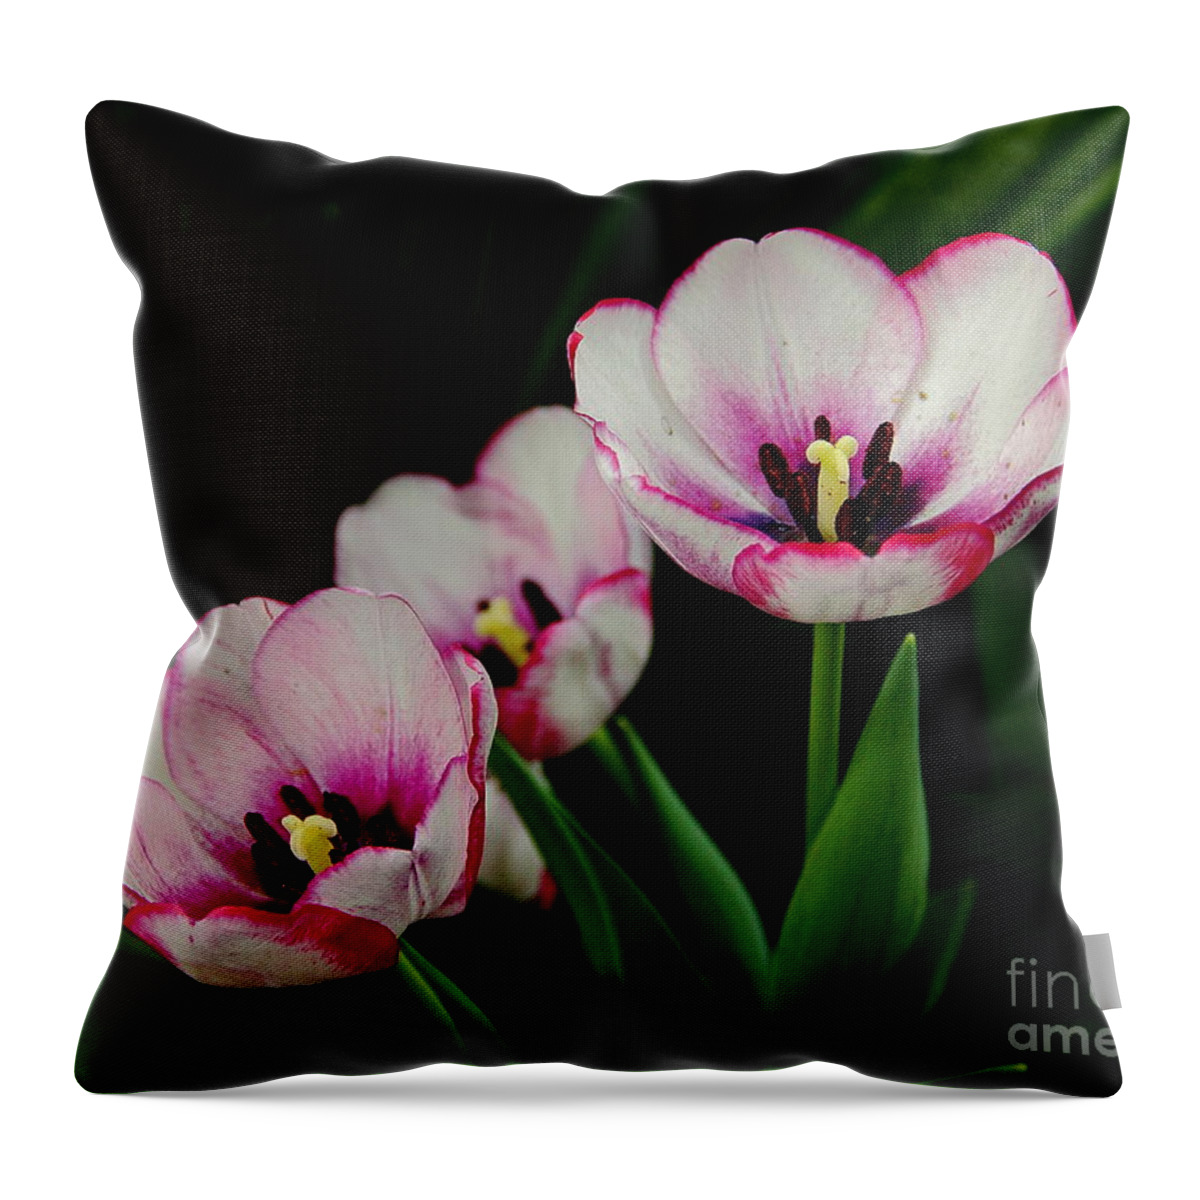 Flowers Throw Pillow featuring the photograph Beauty Abounds by Allen Nice-Webb